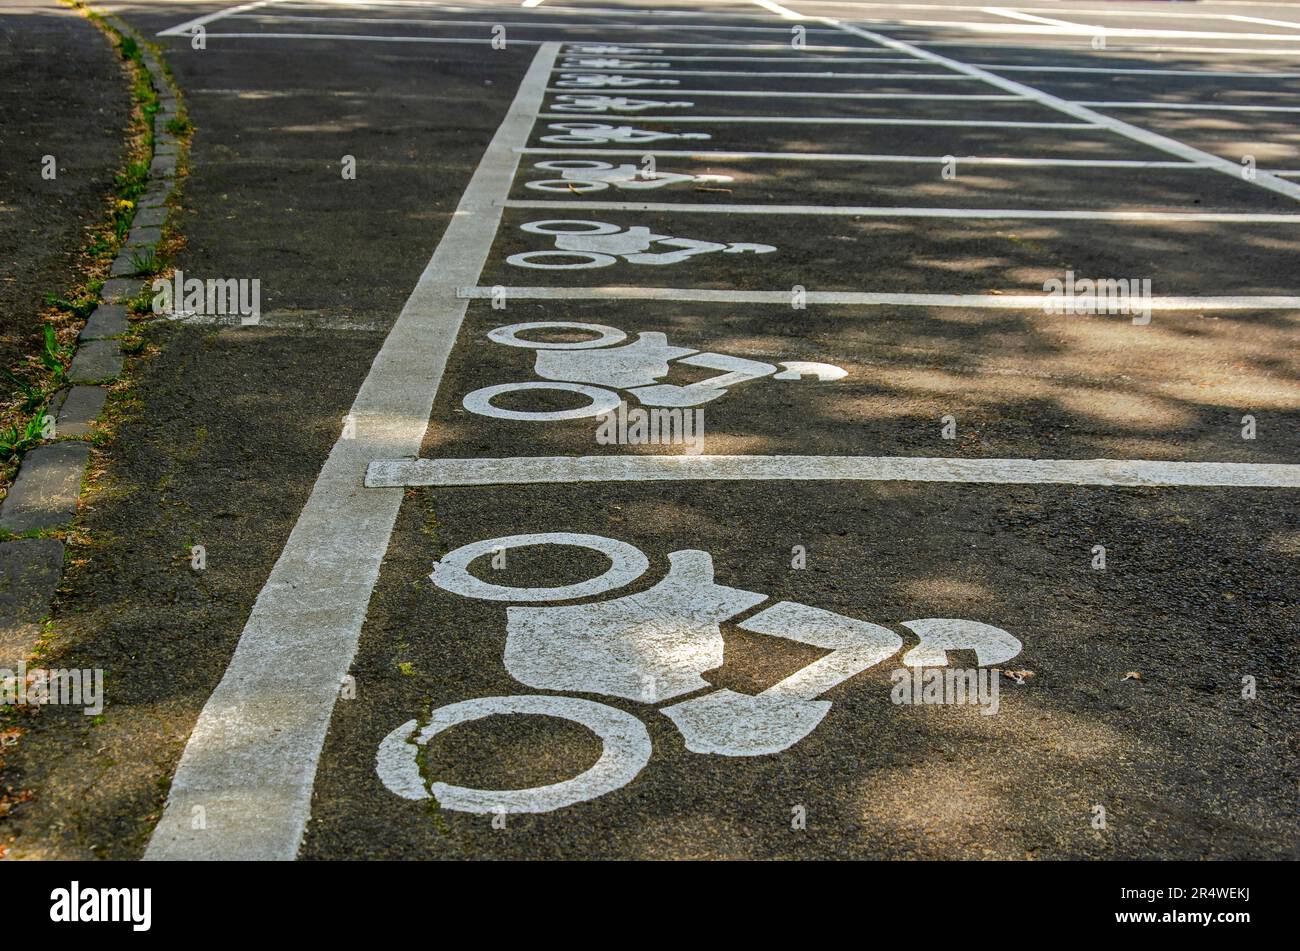 Daun, Germany, May 26, 2023: parking spaces for motorbikes on a parking lot near the crater lakes Stock Photo